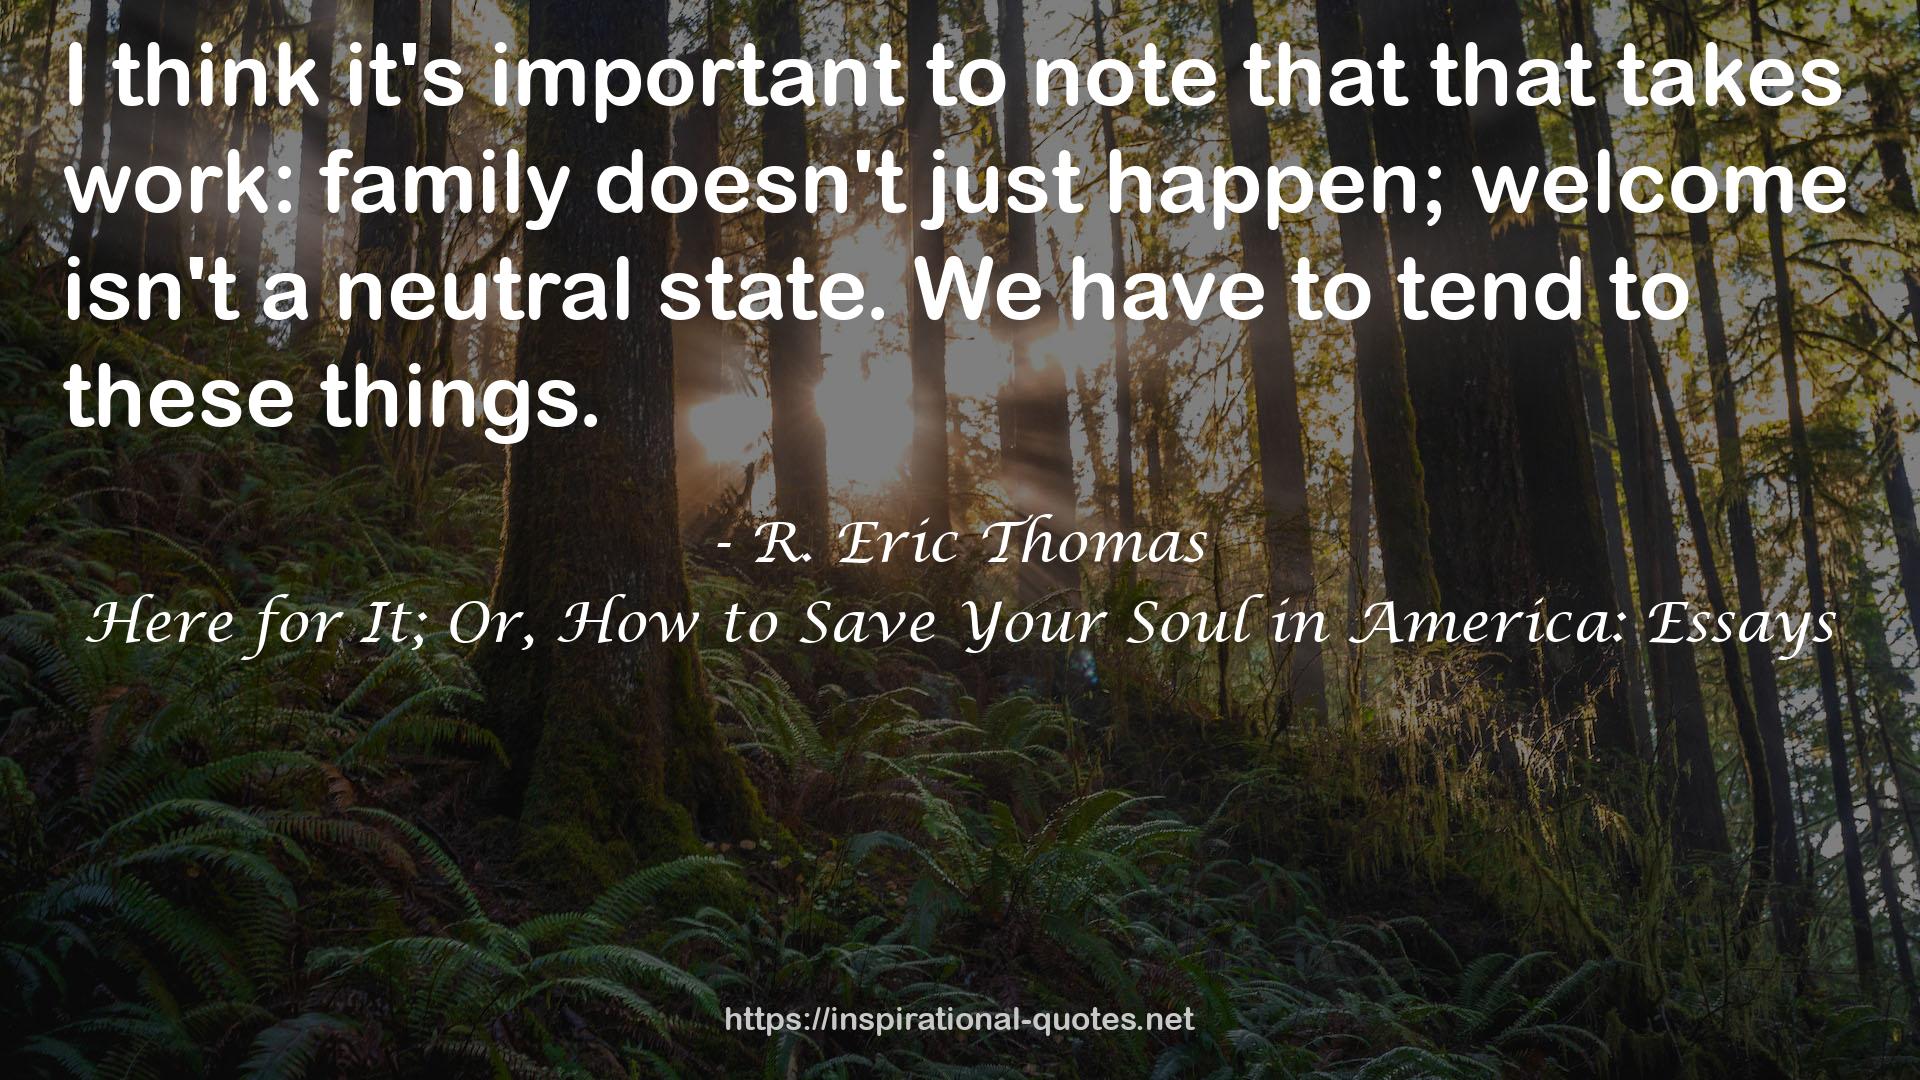 Here for It; Or, How to Save Your Soul in America: Essays QUOTES